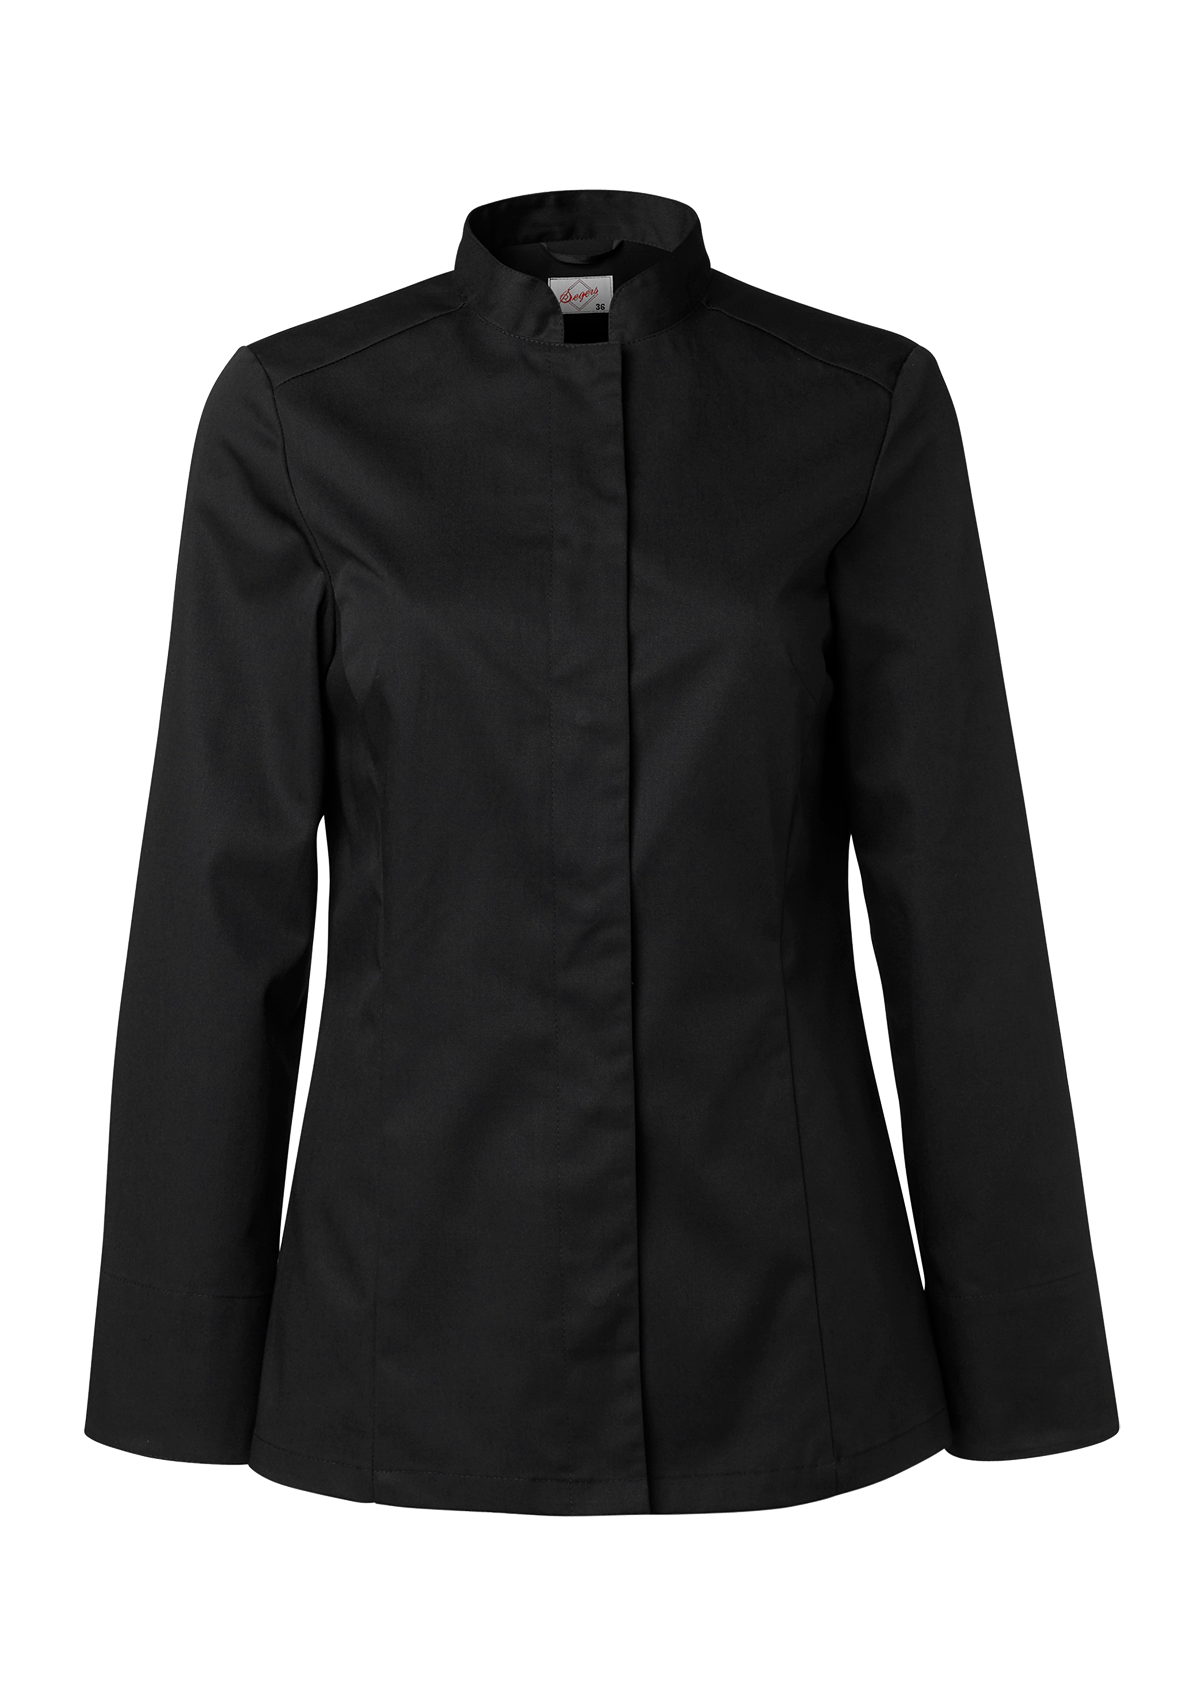 Women's Chef shirt in slim-fit with long sleeves. Segers | Cookniche